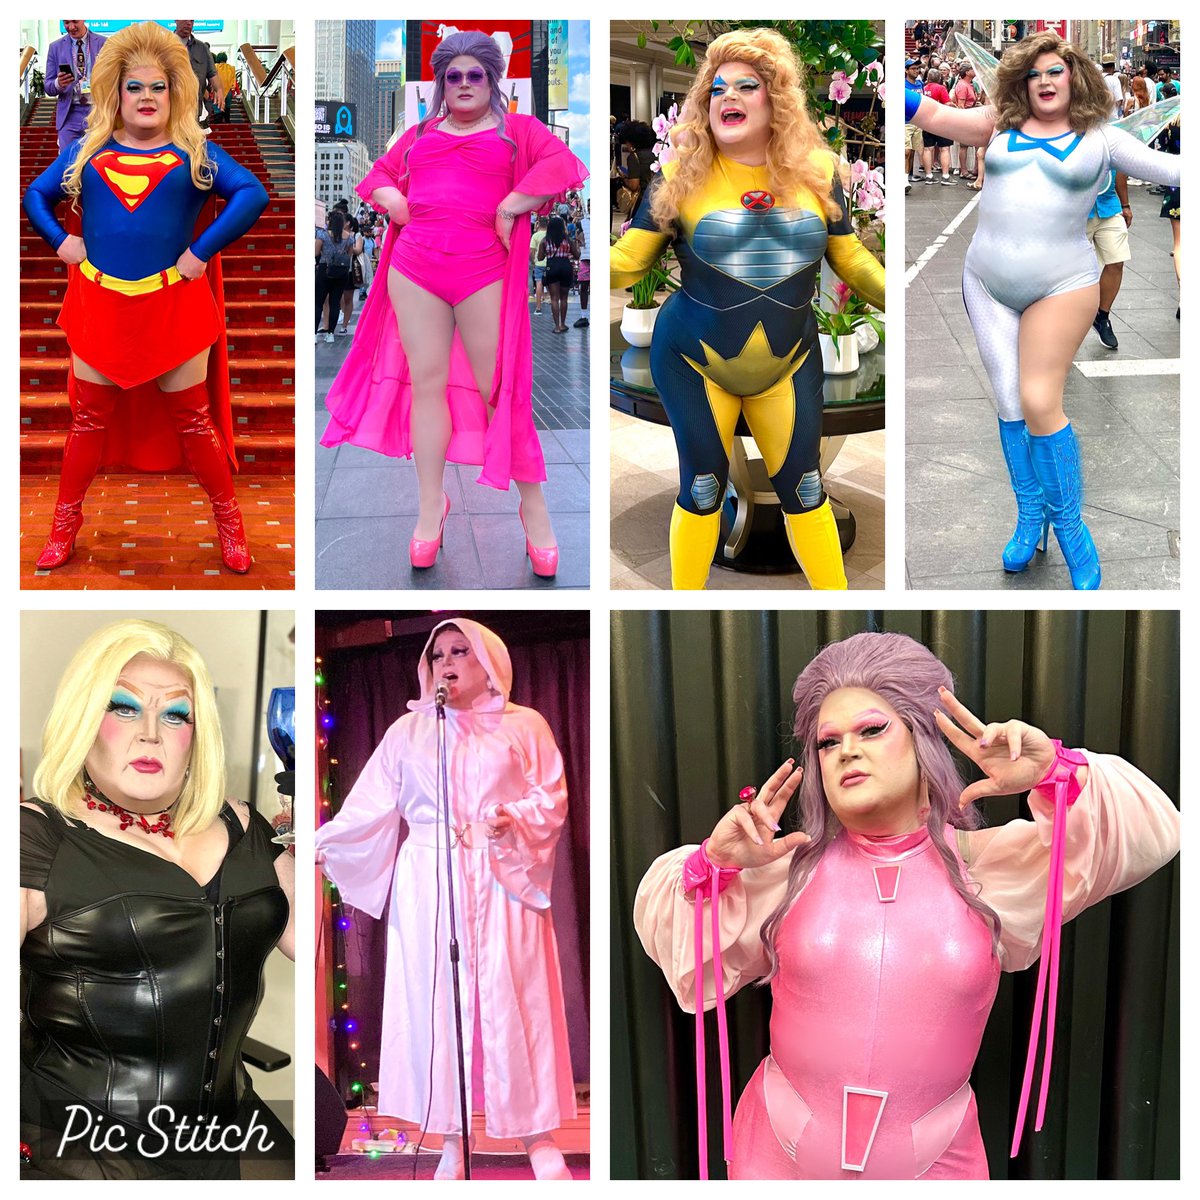 As 2023 comes to a close, here’s a throwback to all of the NEW cosplays I did this past year. 15 completed cosplays and I’ve got so much planned for 2024 already!!! #chanteuseofsouthernmaryland #dragqueen #cosplay #2023cosplays